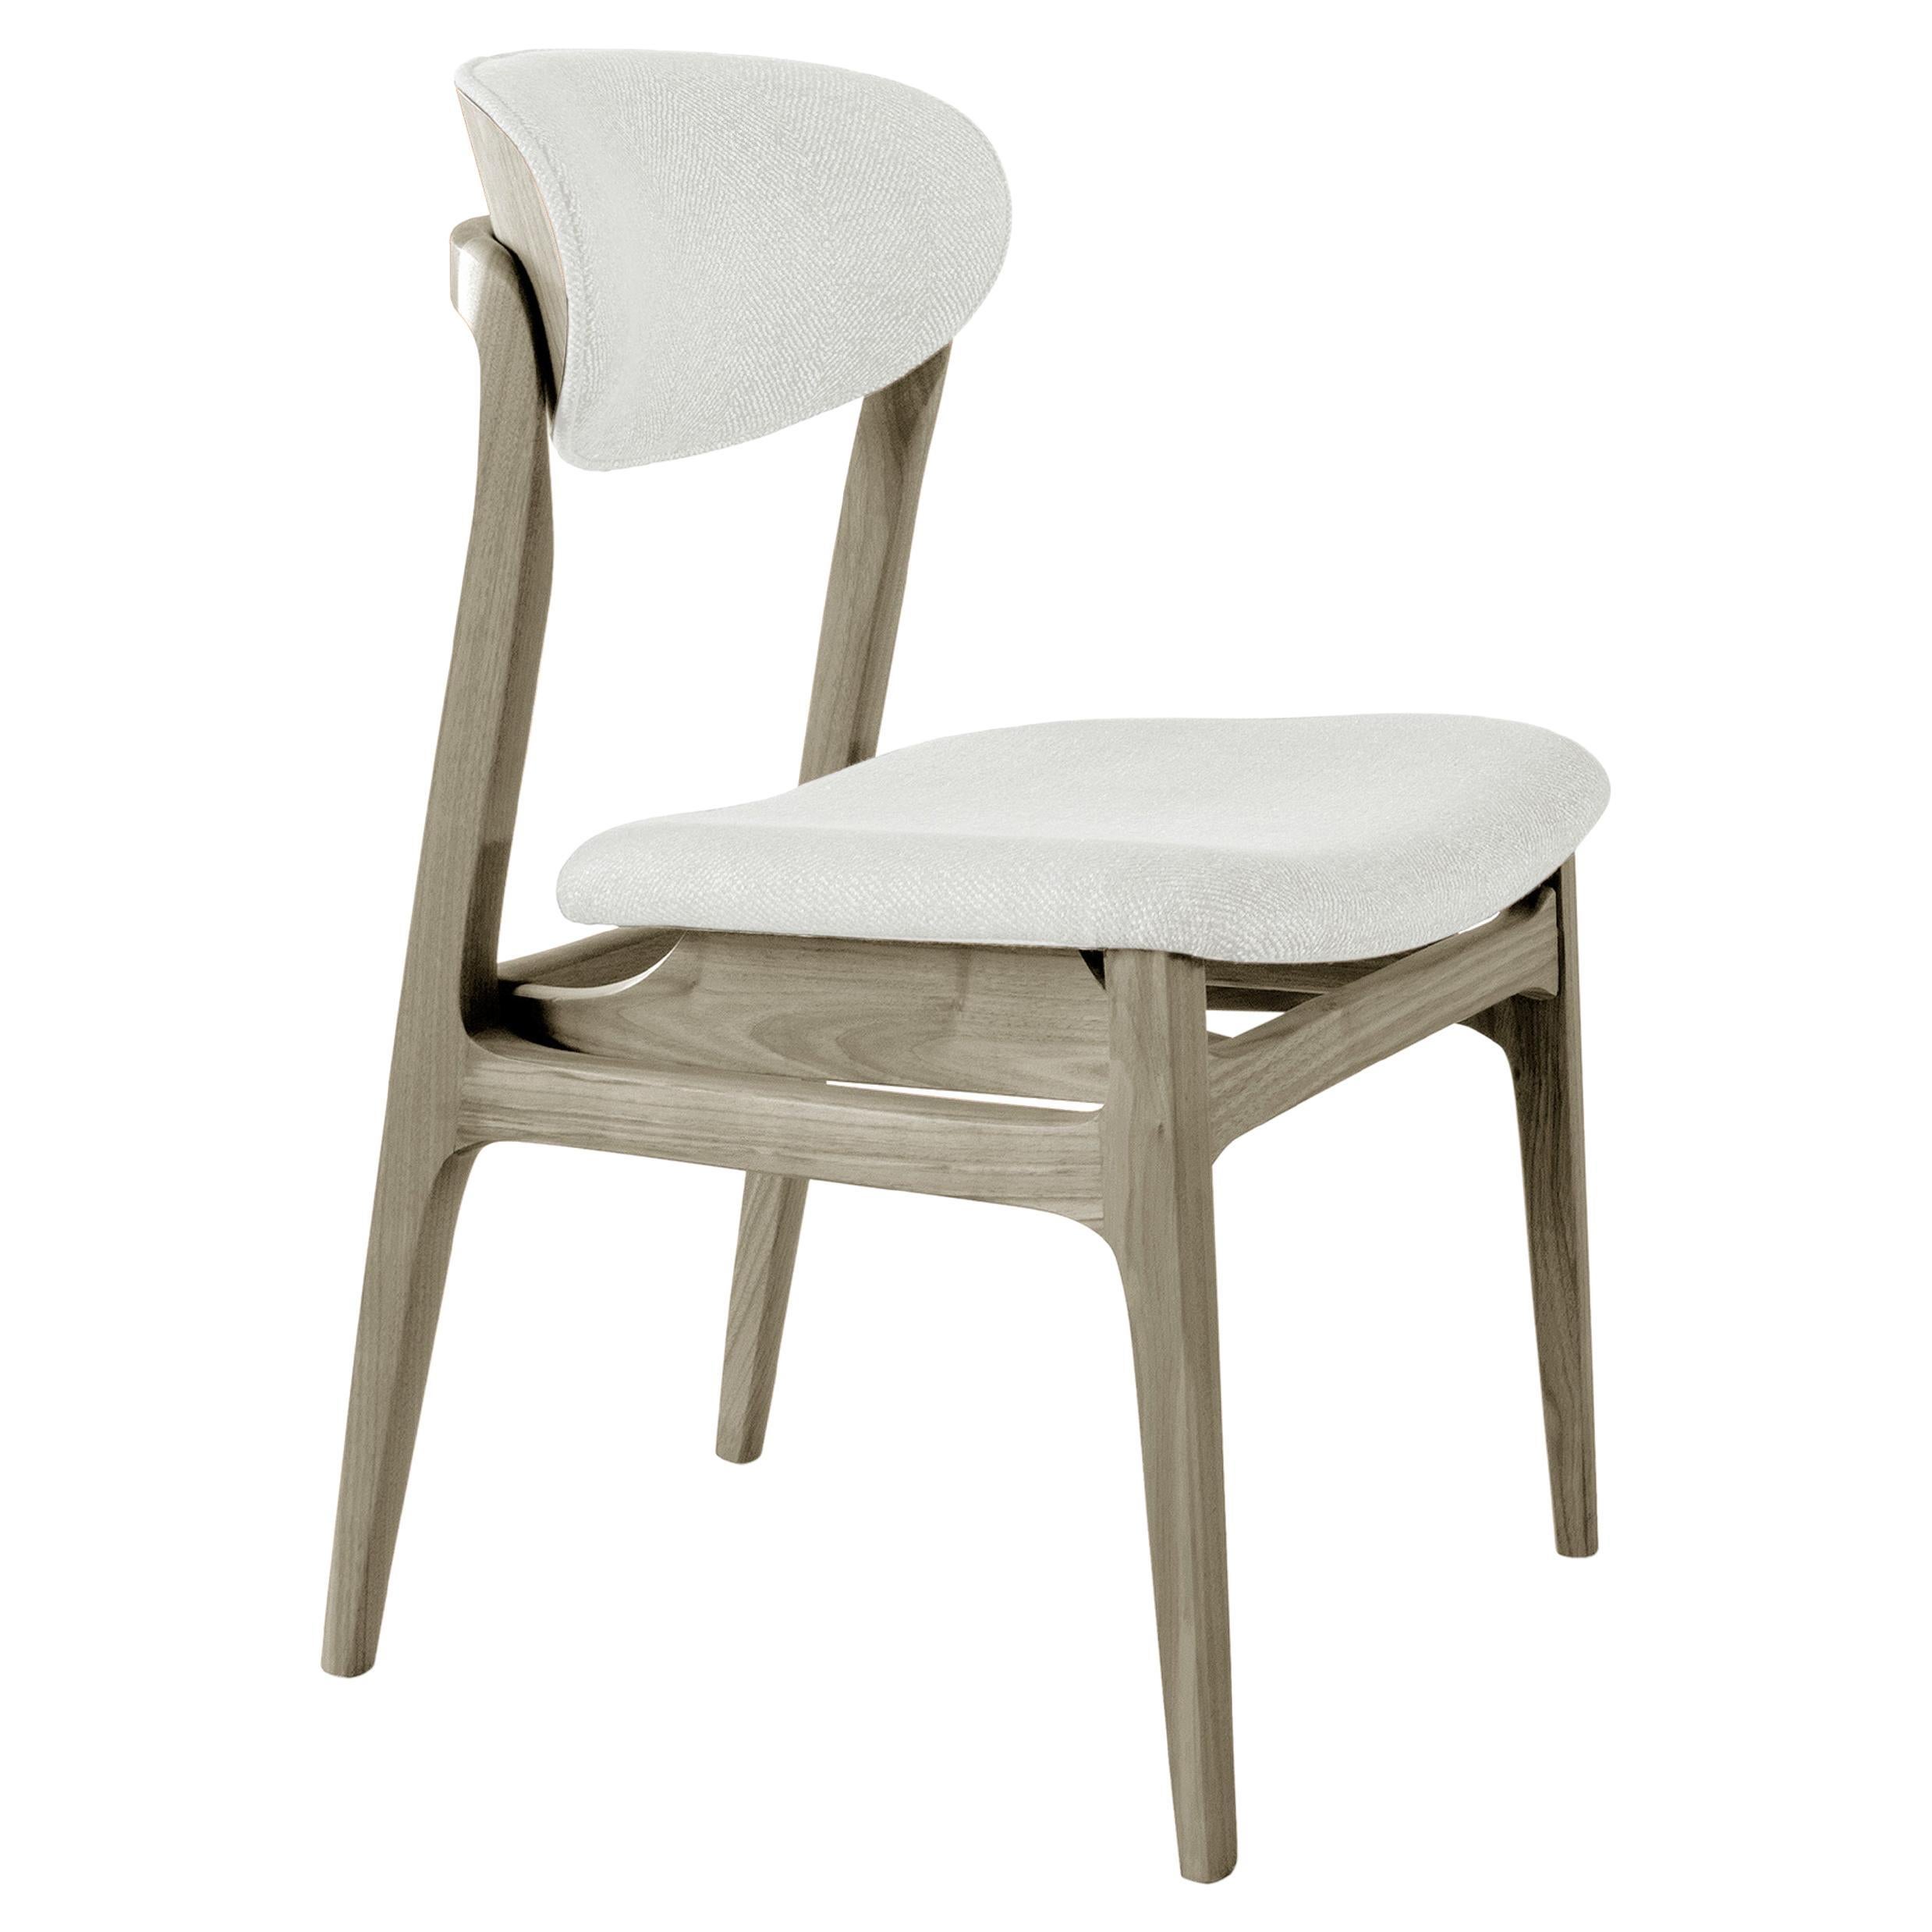 Agio Solid Wood Chair, Walnut in Hand-Made Natural Grey Finish, Contemporary